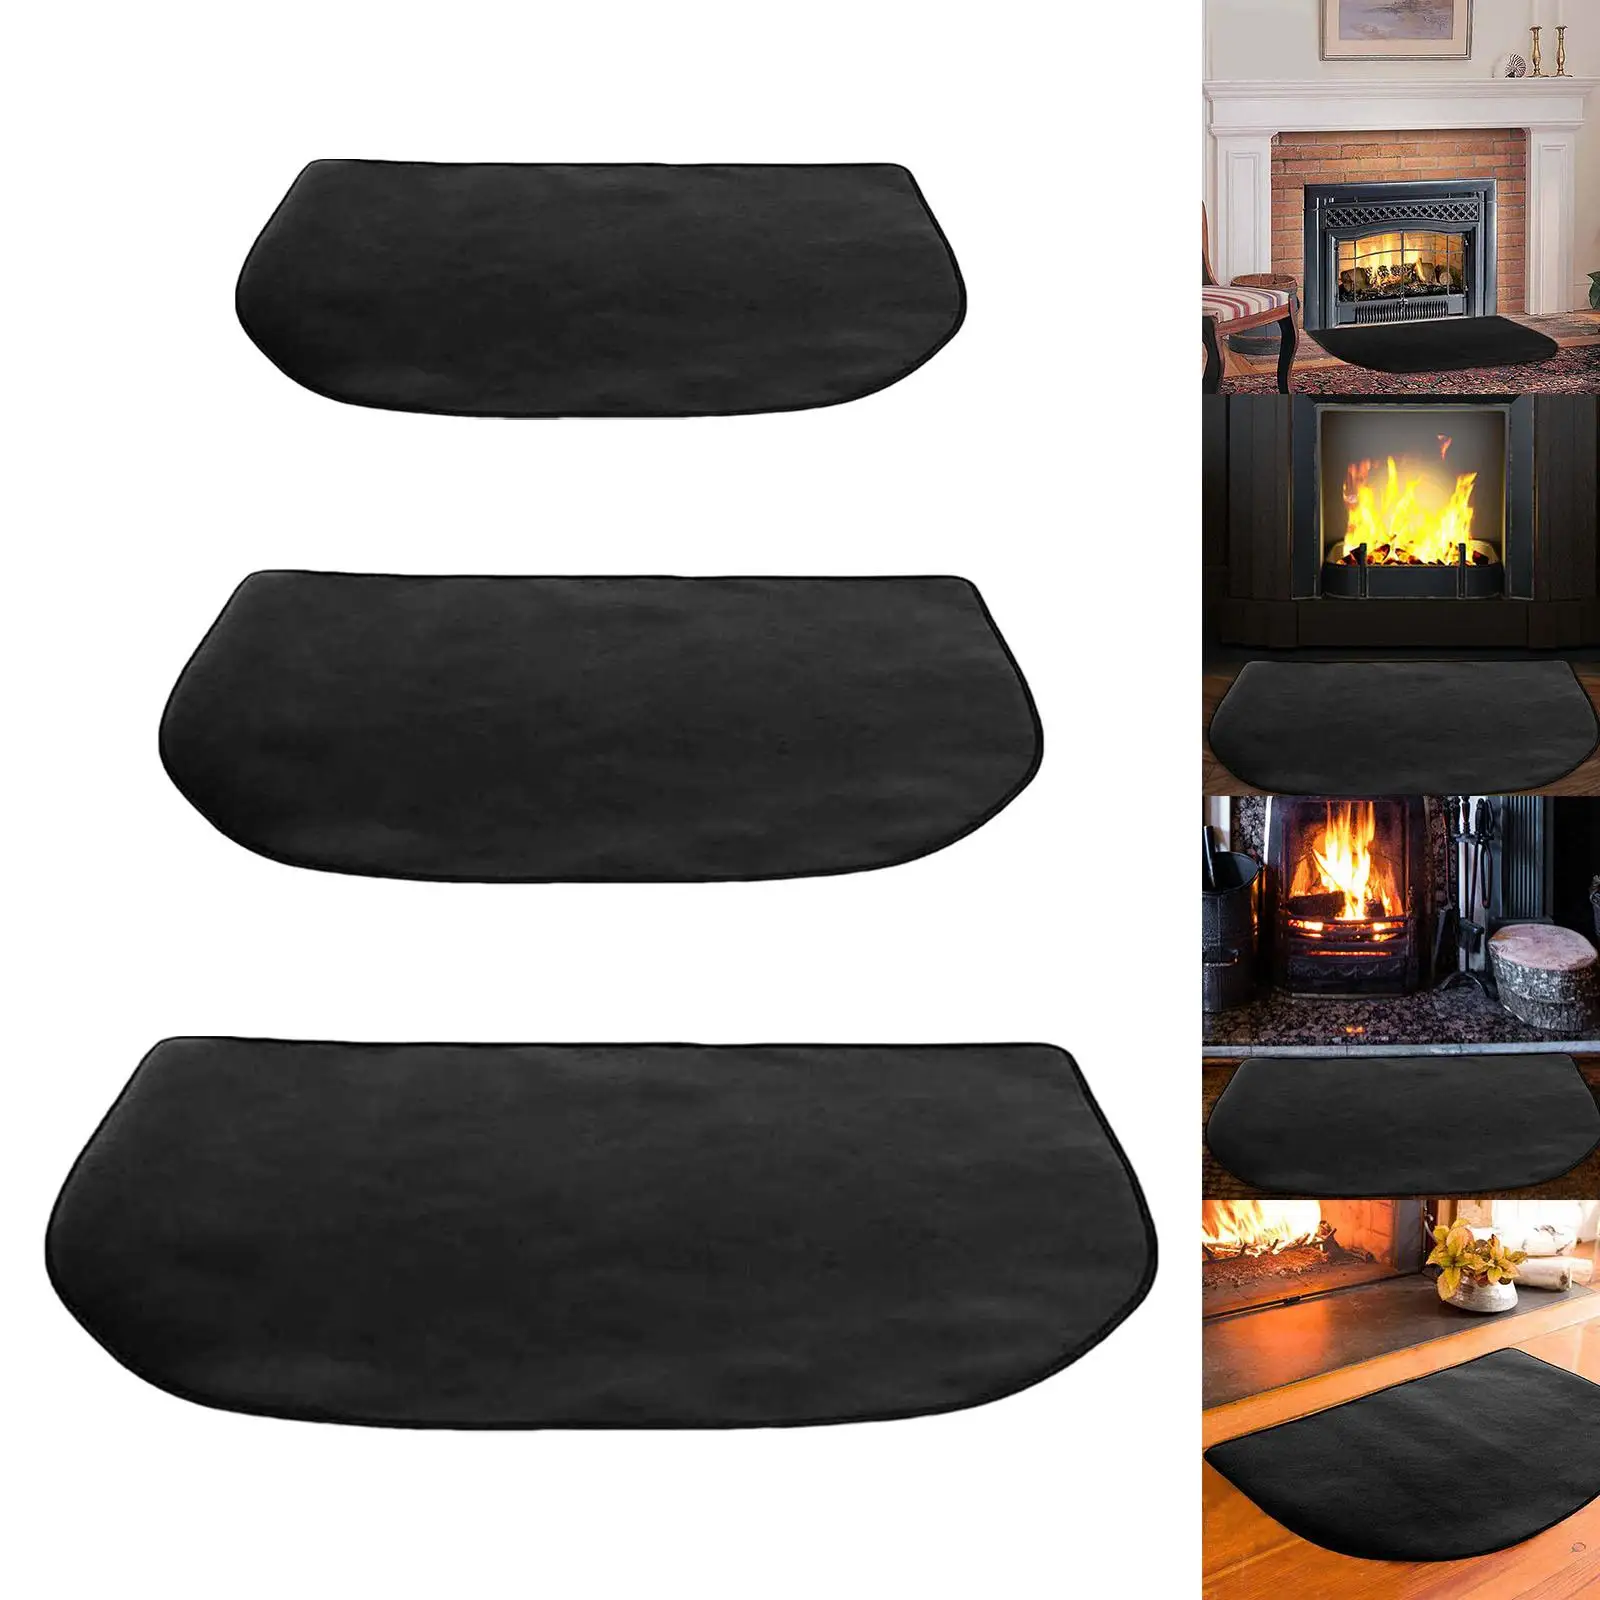 Fireproof Mat Black Protective Pad Heat for Fireplaces Camping Grill